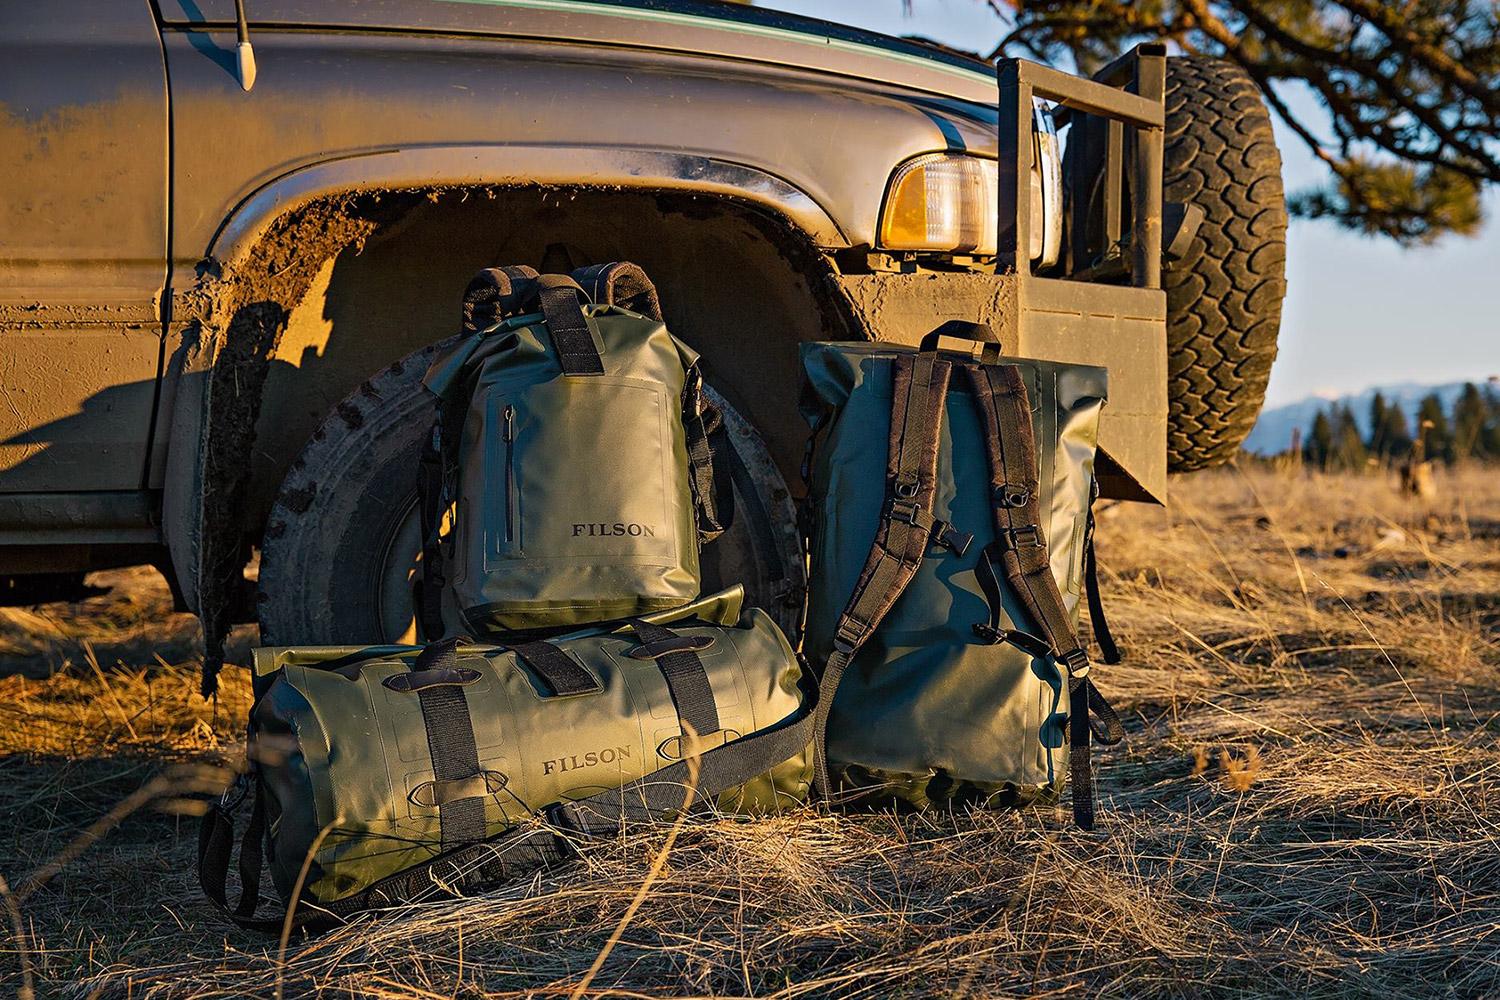 Filson's Dry Bags: Stylish, rugged, and ready